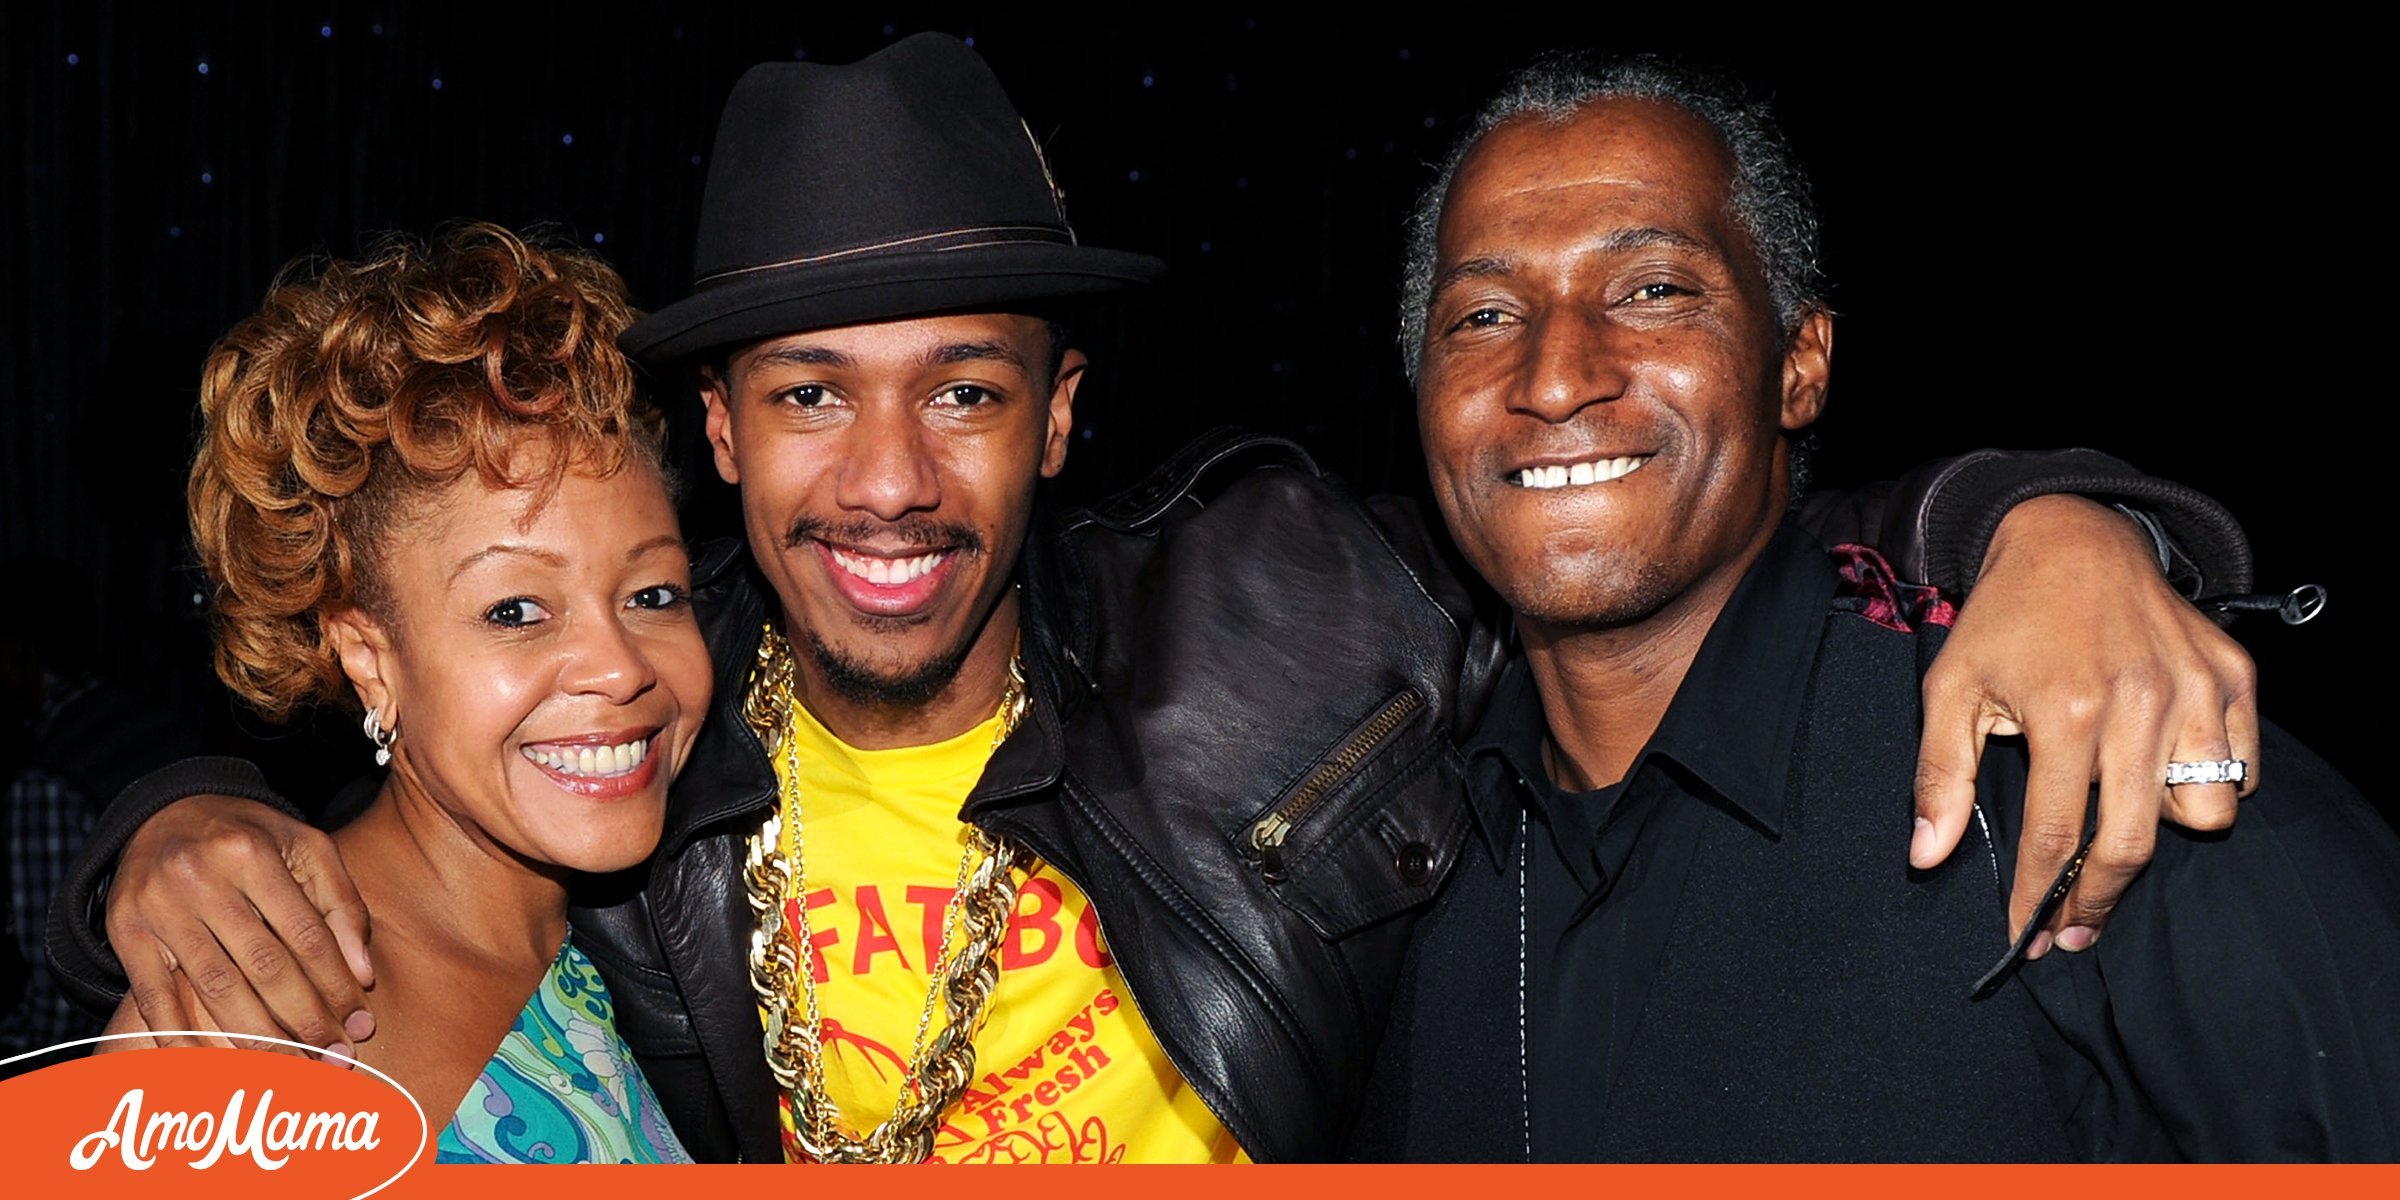 Nick Cannon’s Parents Did Not Raise Him Facts about the Famous Host’s